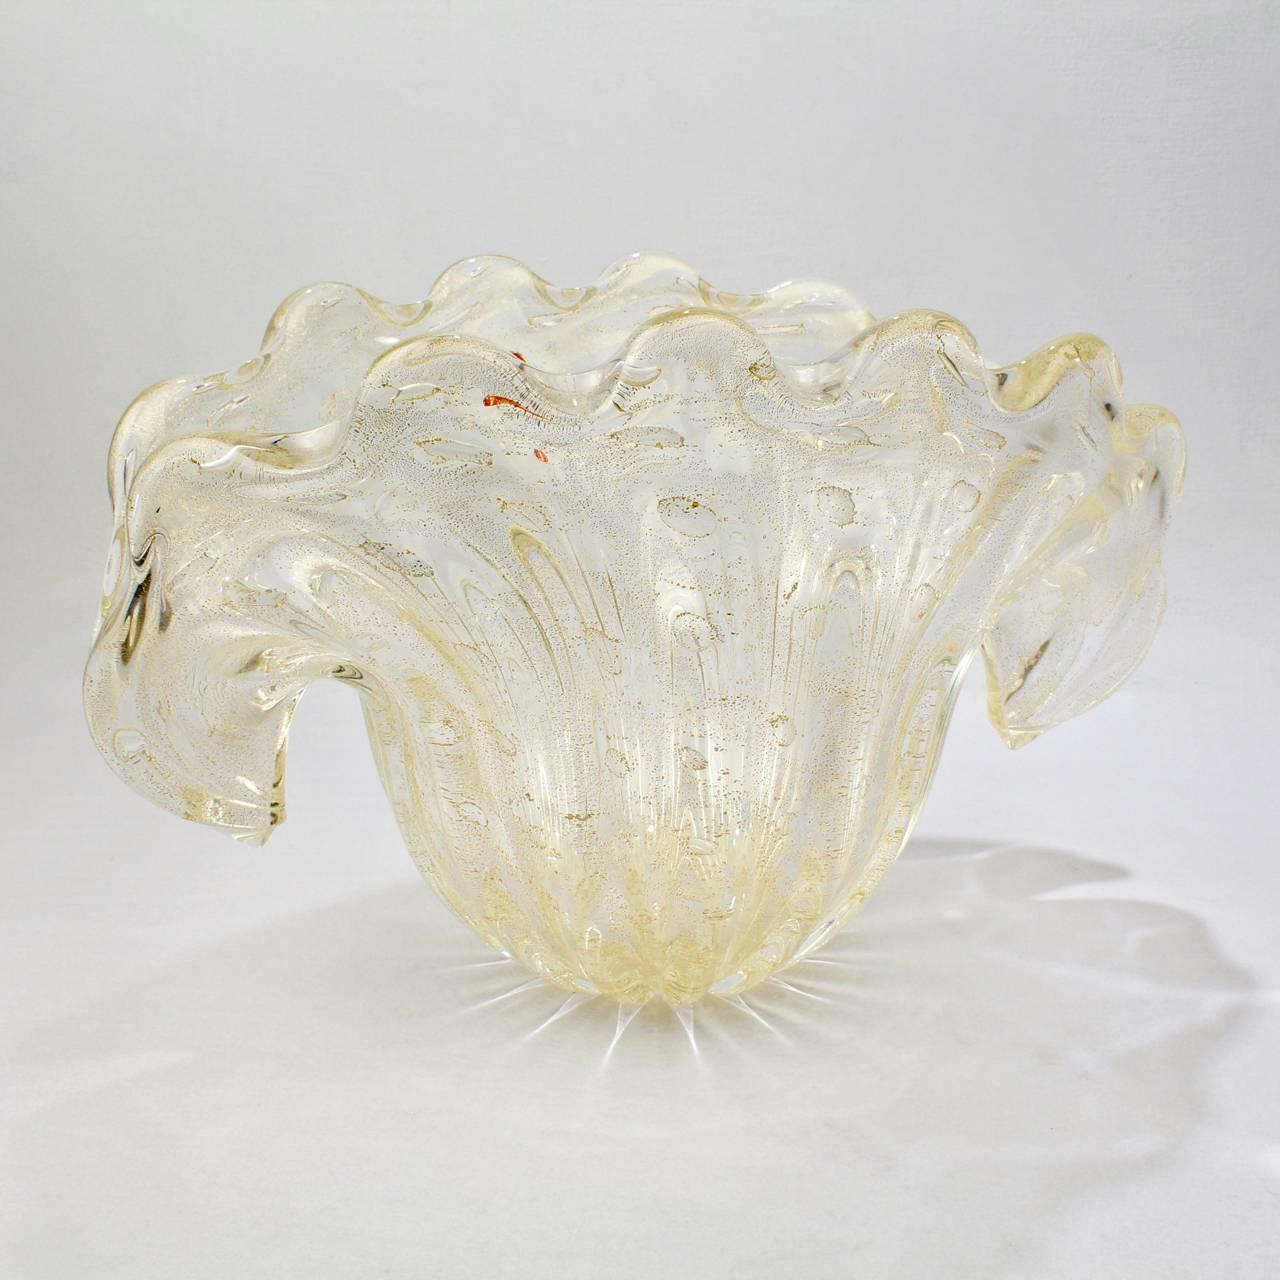 A very large Mid-Century Murano clam shell vase or centerpiece. 

Attributed to Barovier.

A ribbed or fluted, very light gold (almost clear) color glass with gold fleck inclusions and captured bubble decoration throughout. 

The base with a